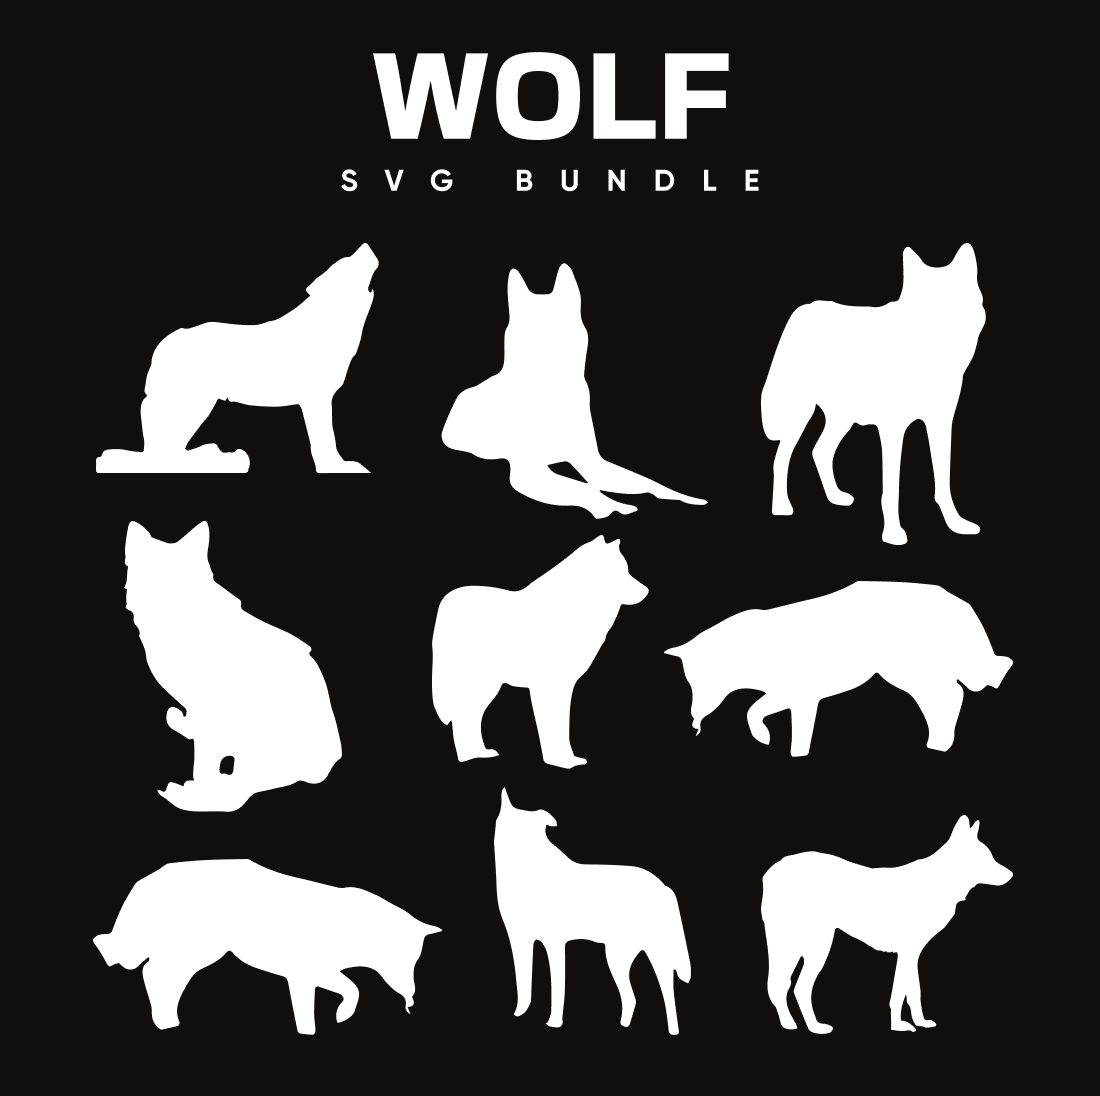 Wolf silhouettes on a black background.